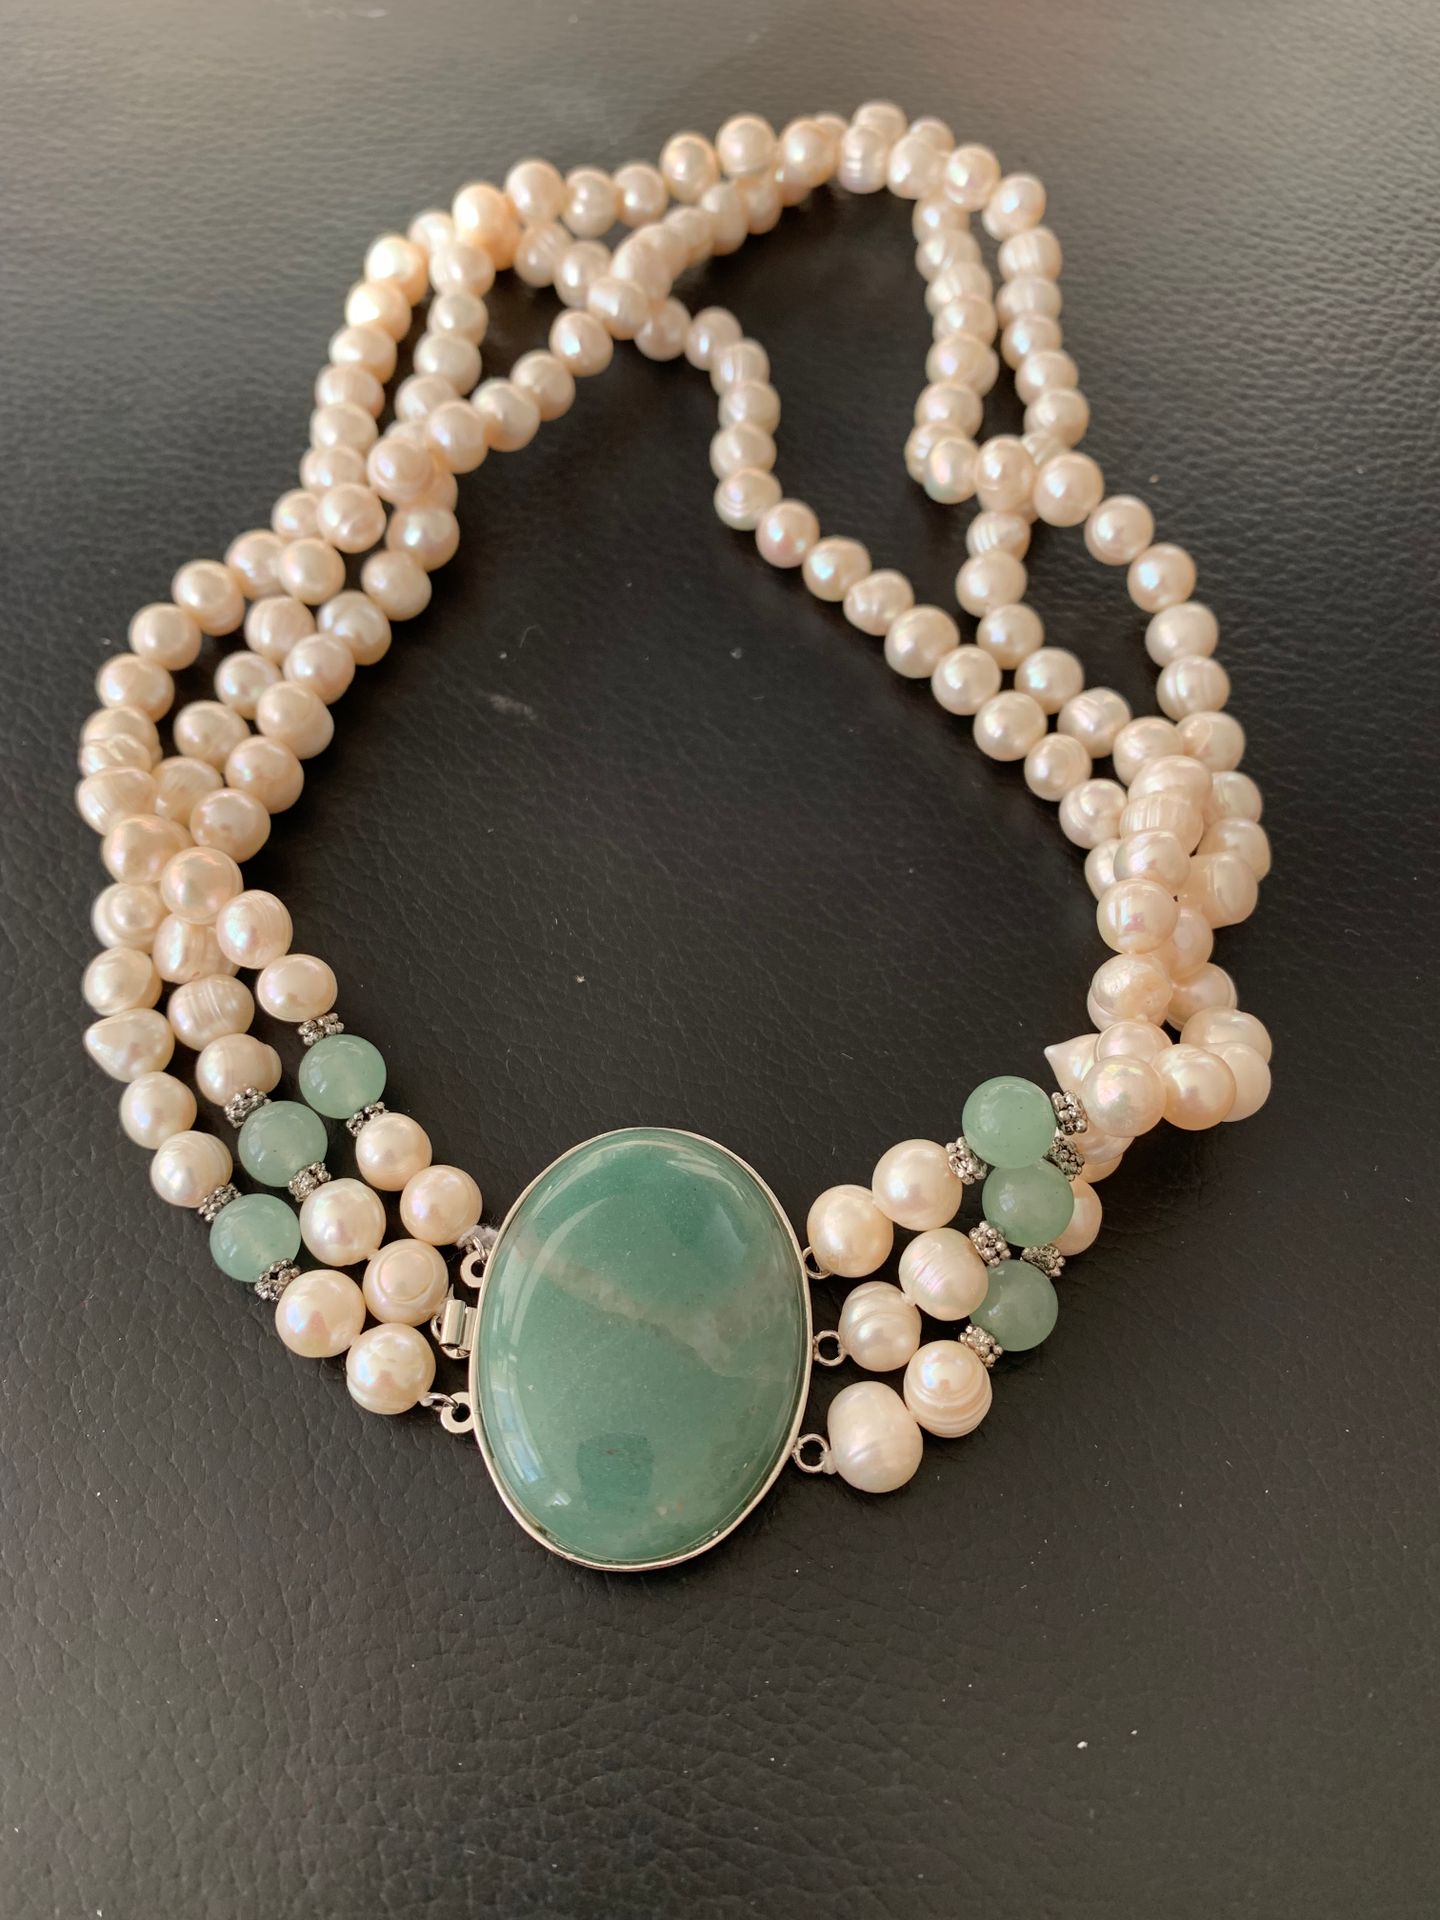 Null Necklace 3 rows of pearls with Agate cabochon clasp